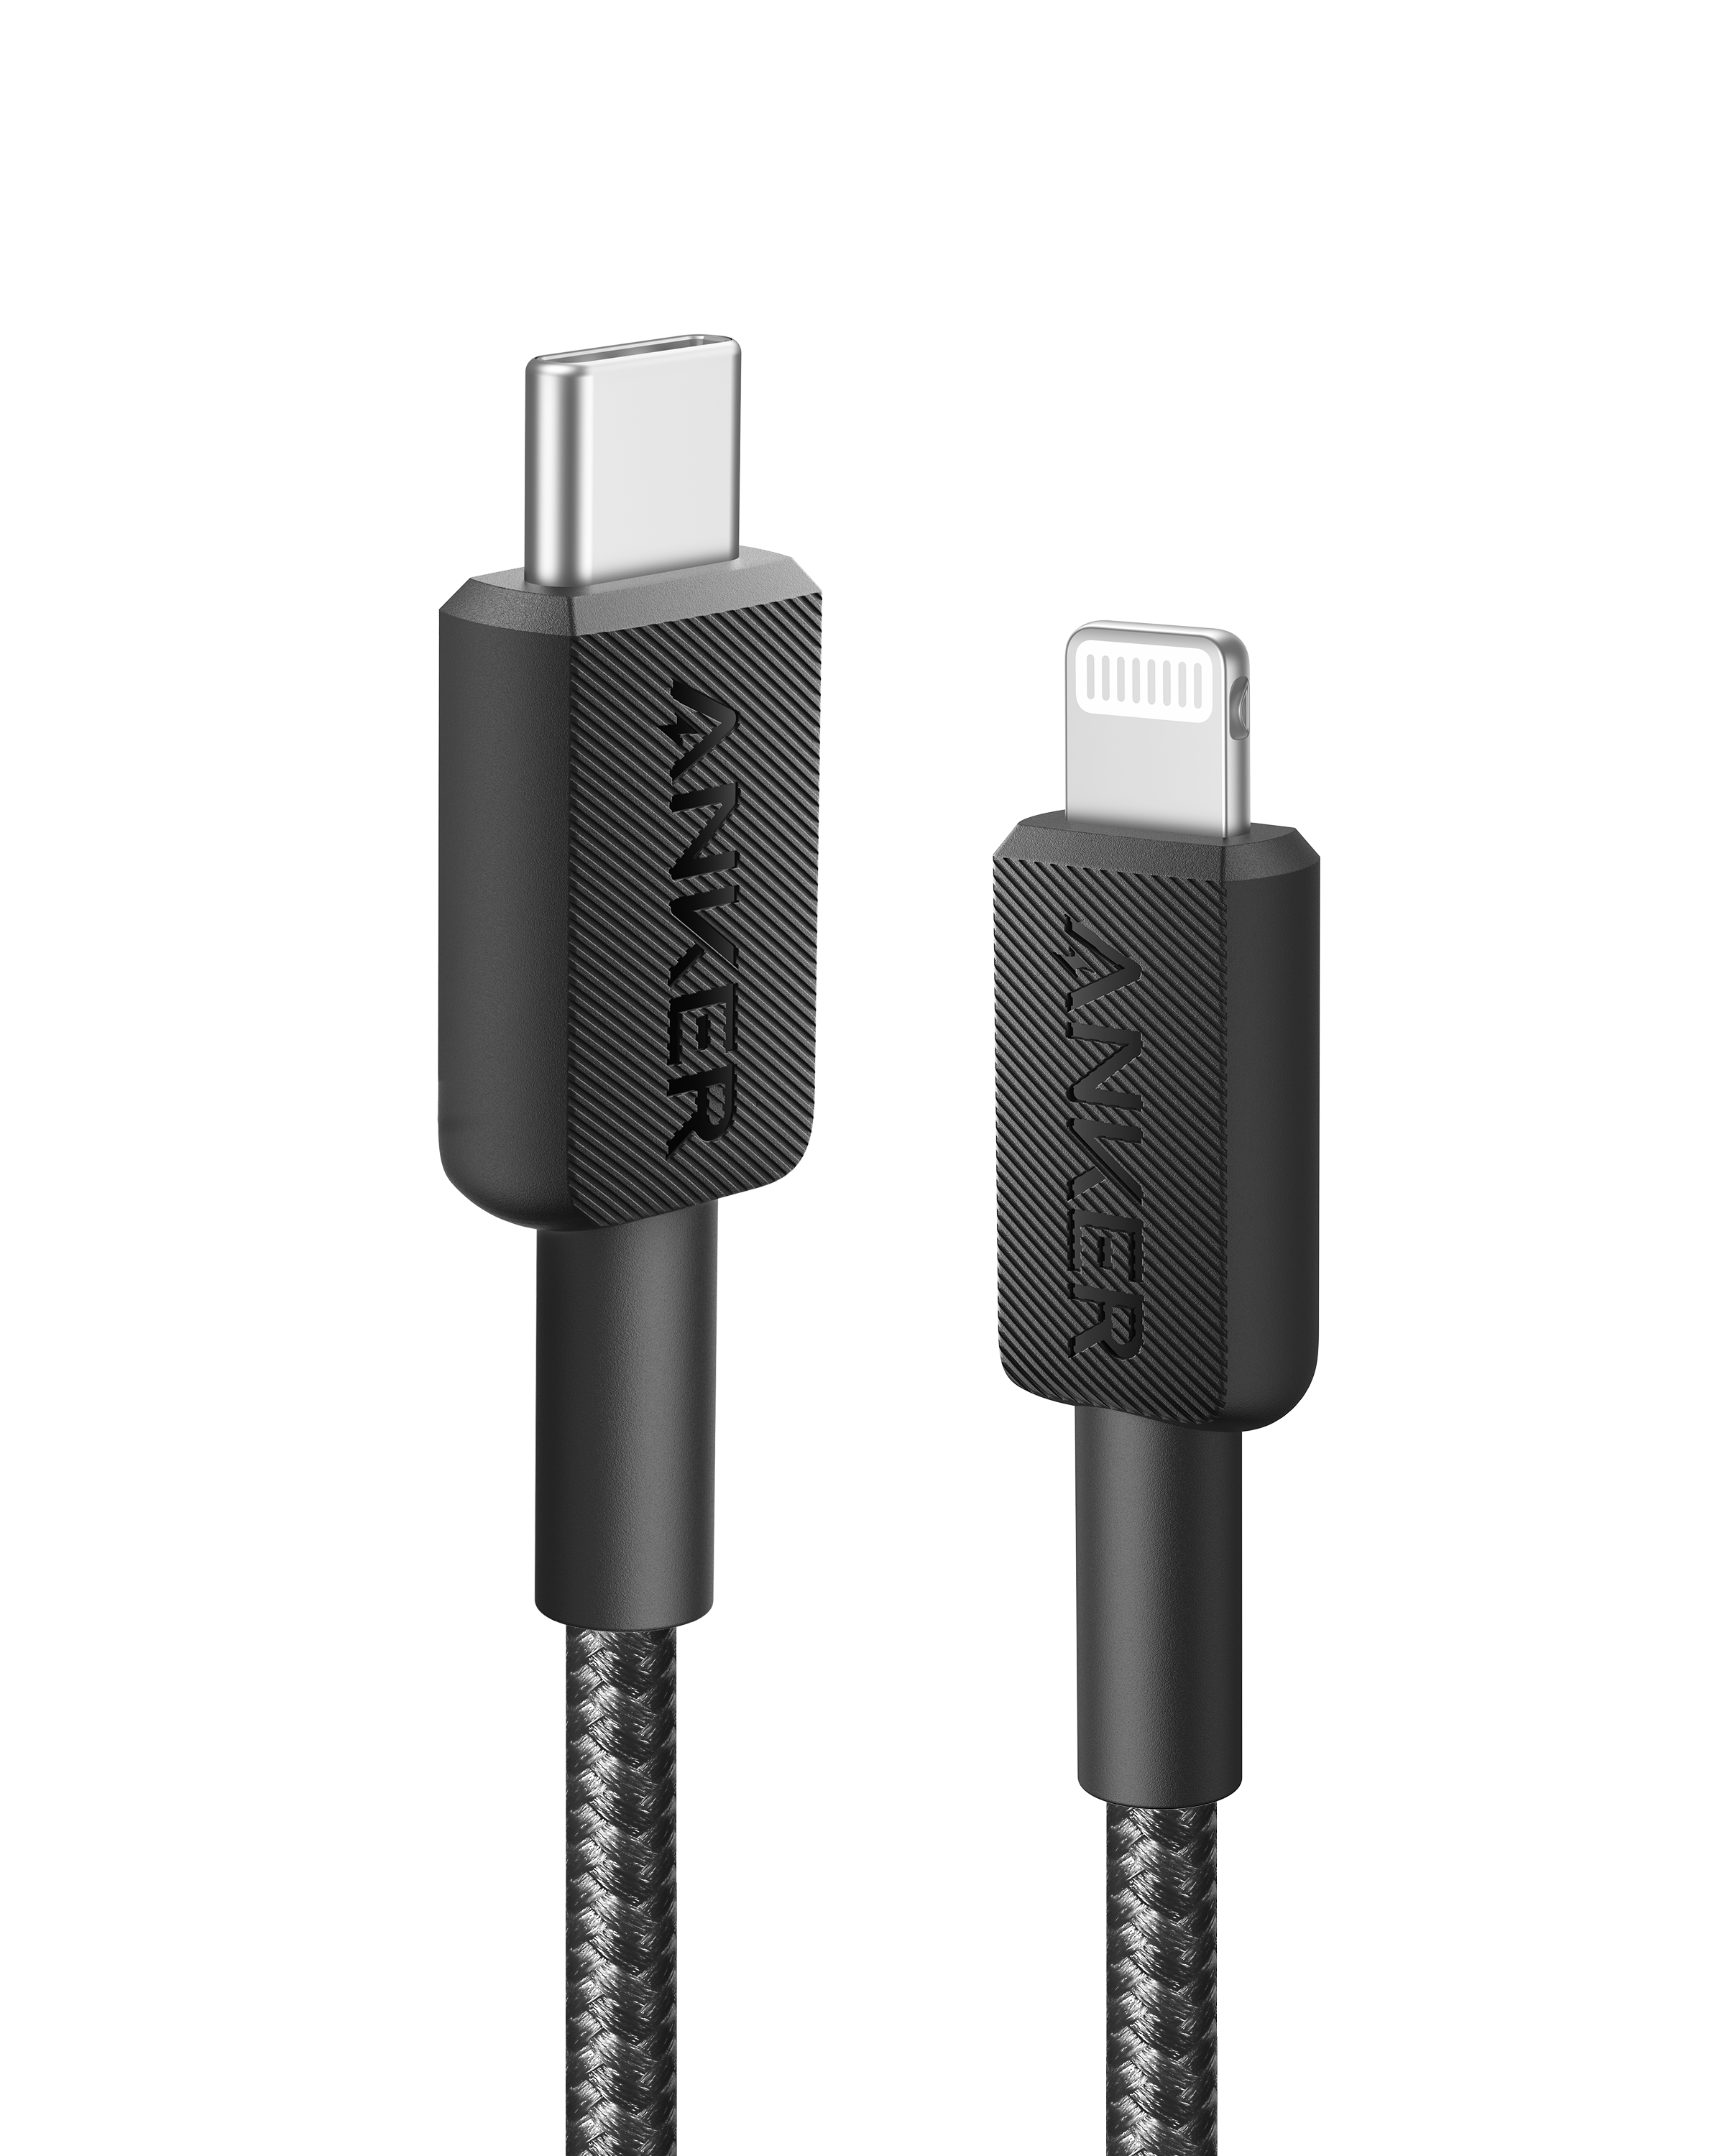 Anker 322 USB Type-C to Lightning Cable, 3 Feet, Black - A81B5H11